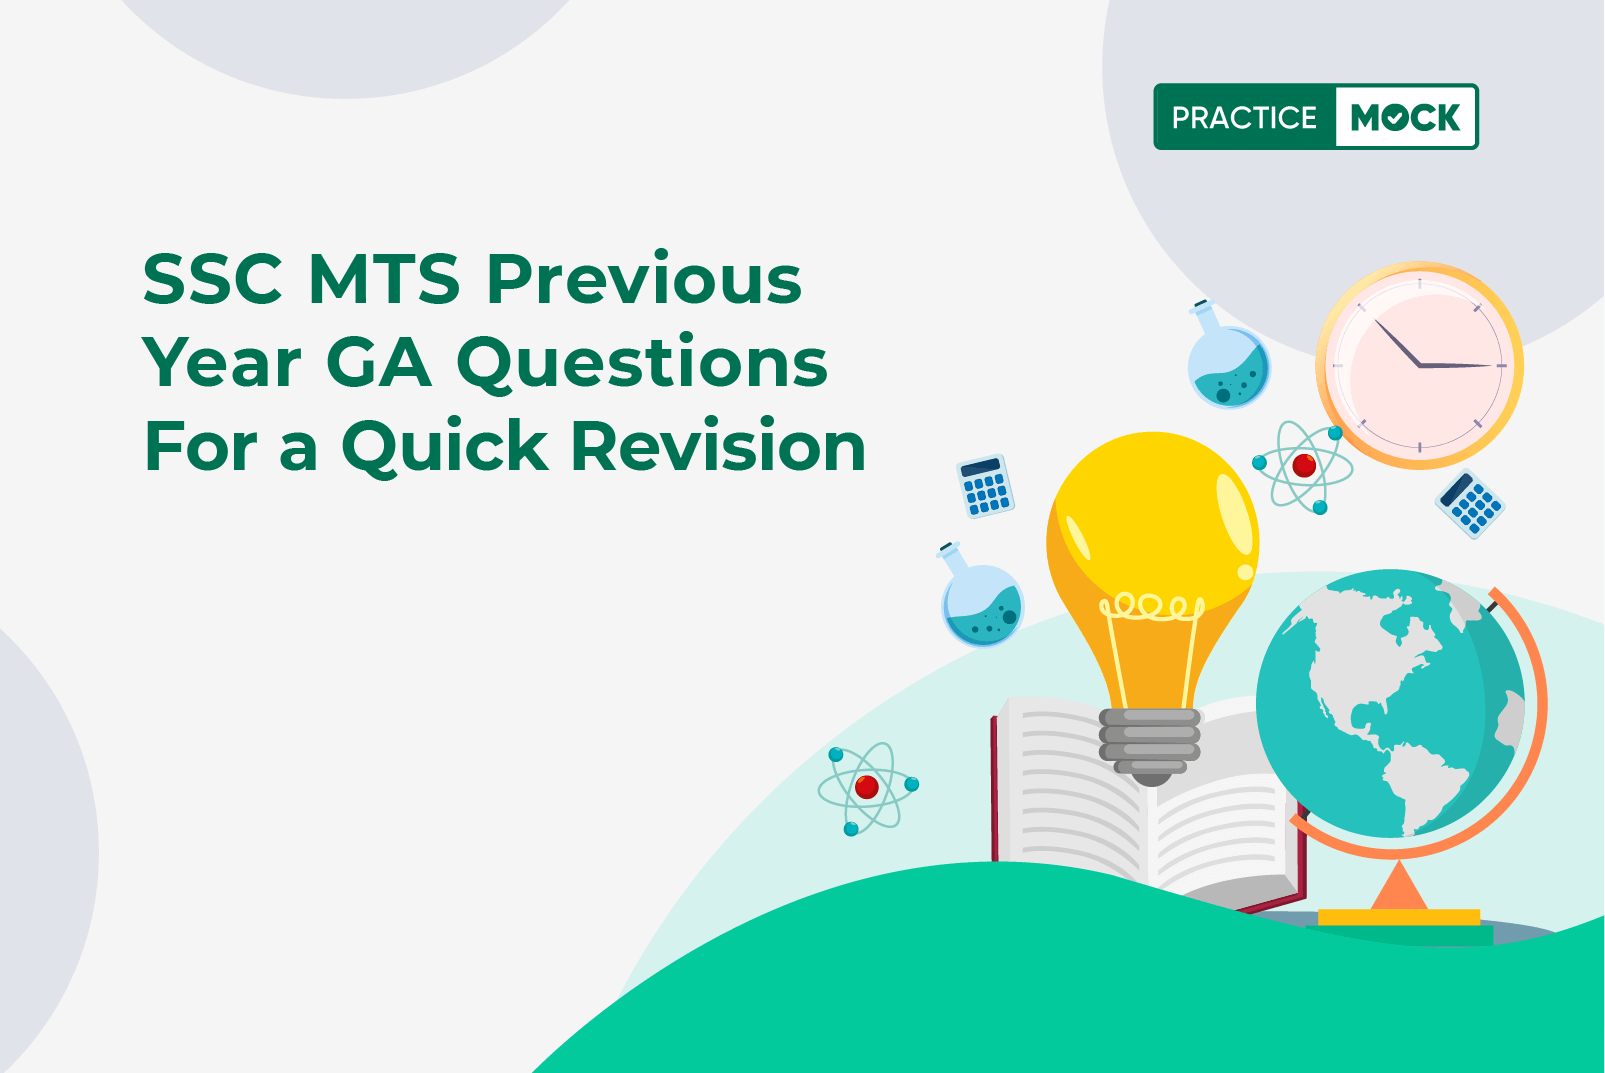 SSC MTS Previous Year GA Questions